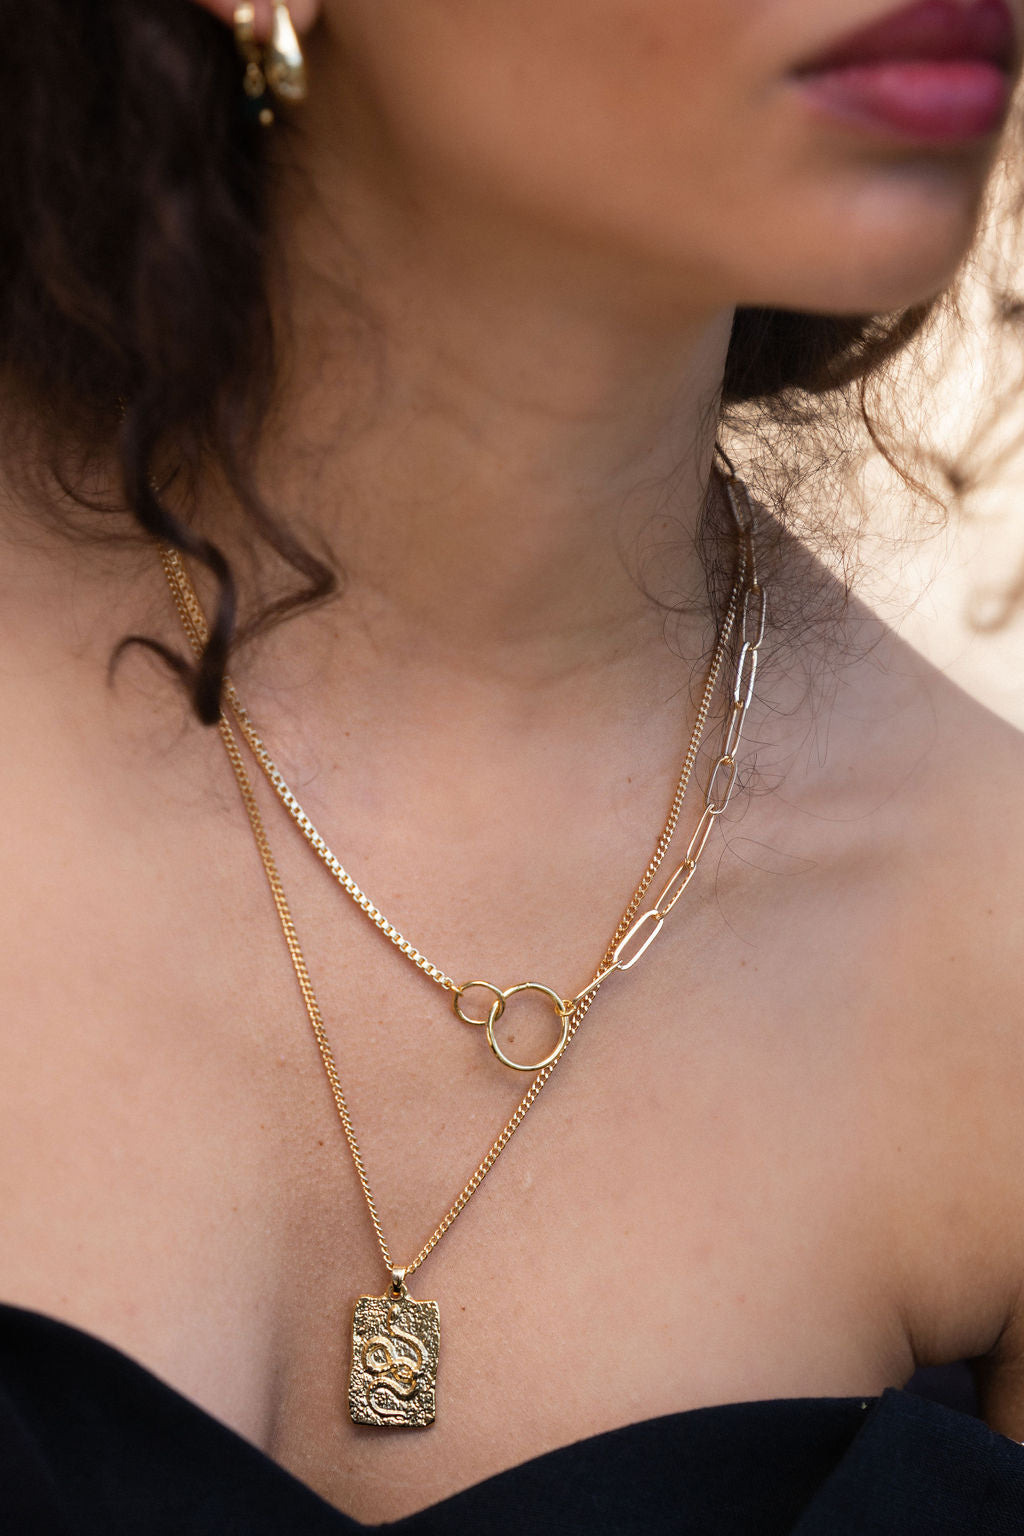 TEXTURED-GOLD-SNAKE-PENDANT-NECKLACE-ON-body